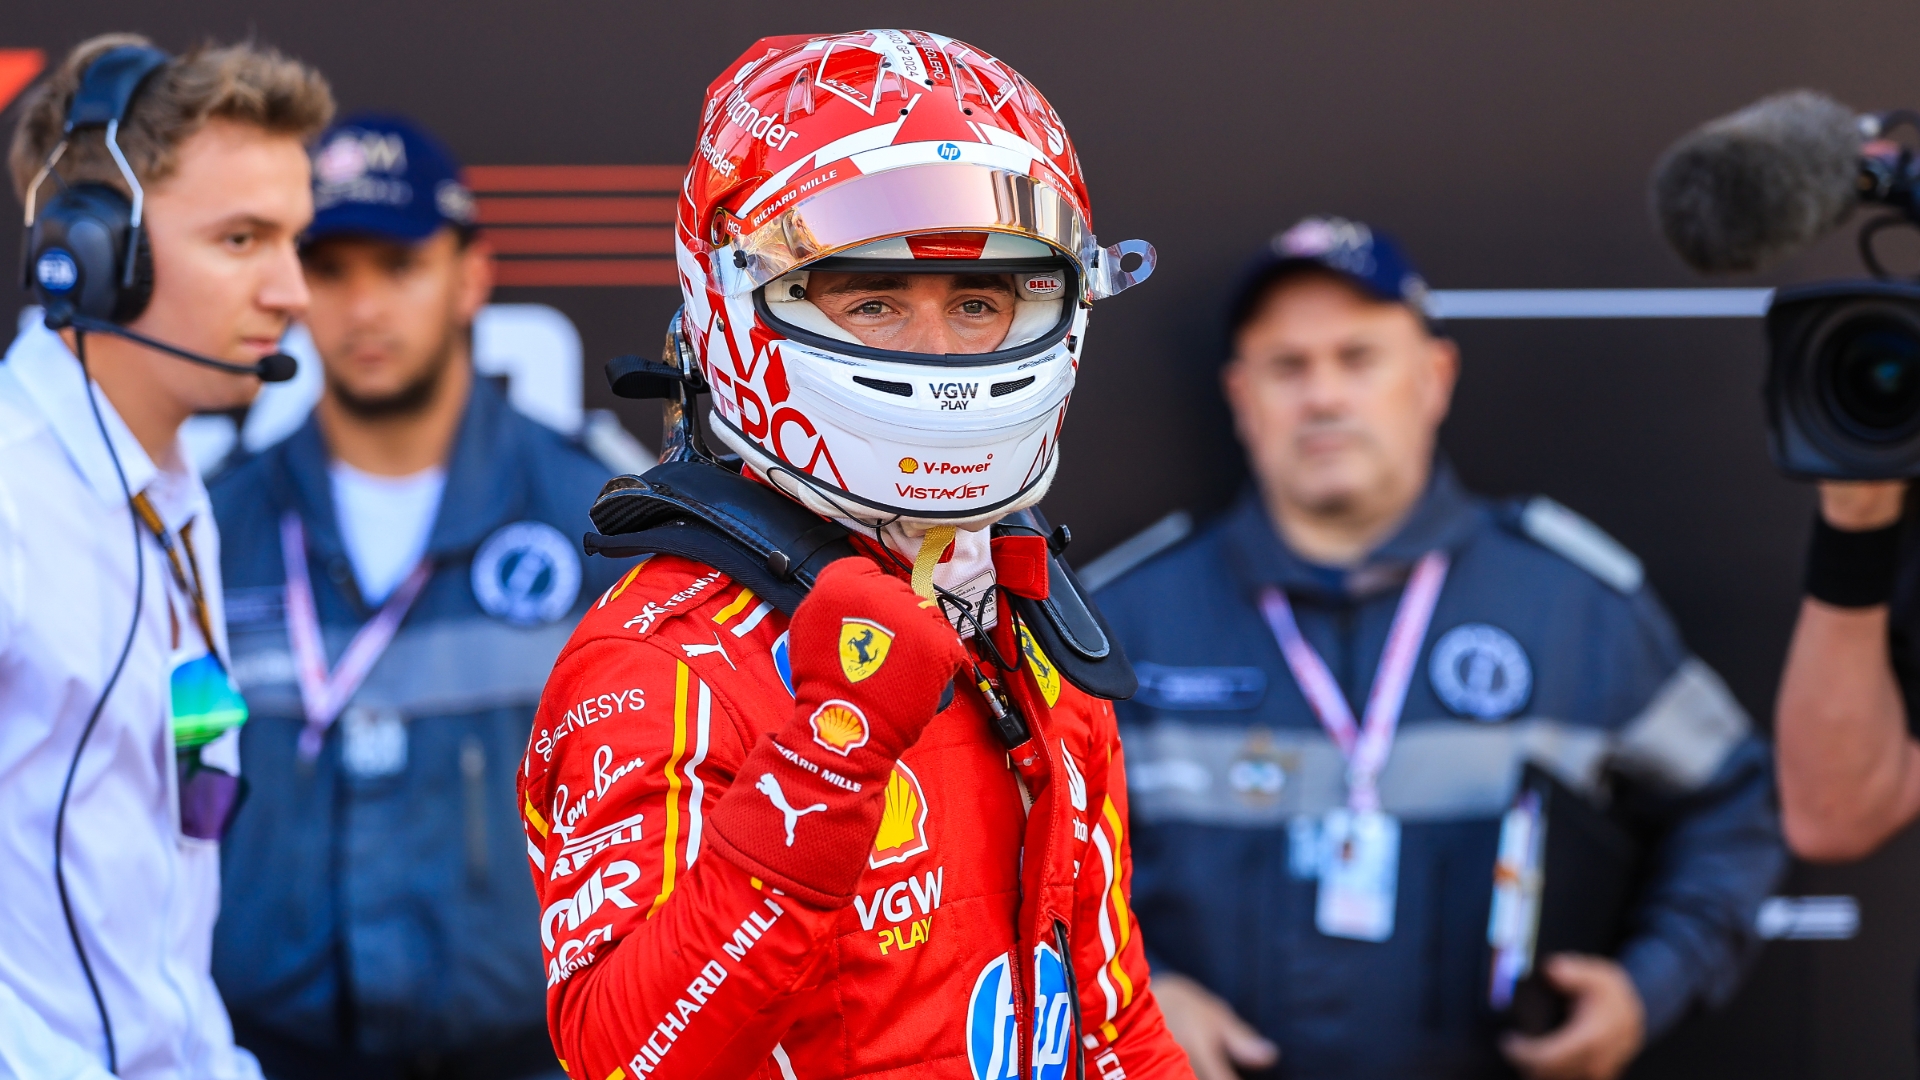 Charles Leclerc claims pole in Monaco